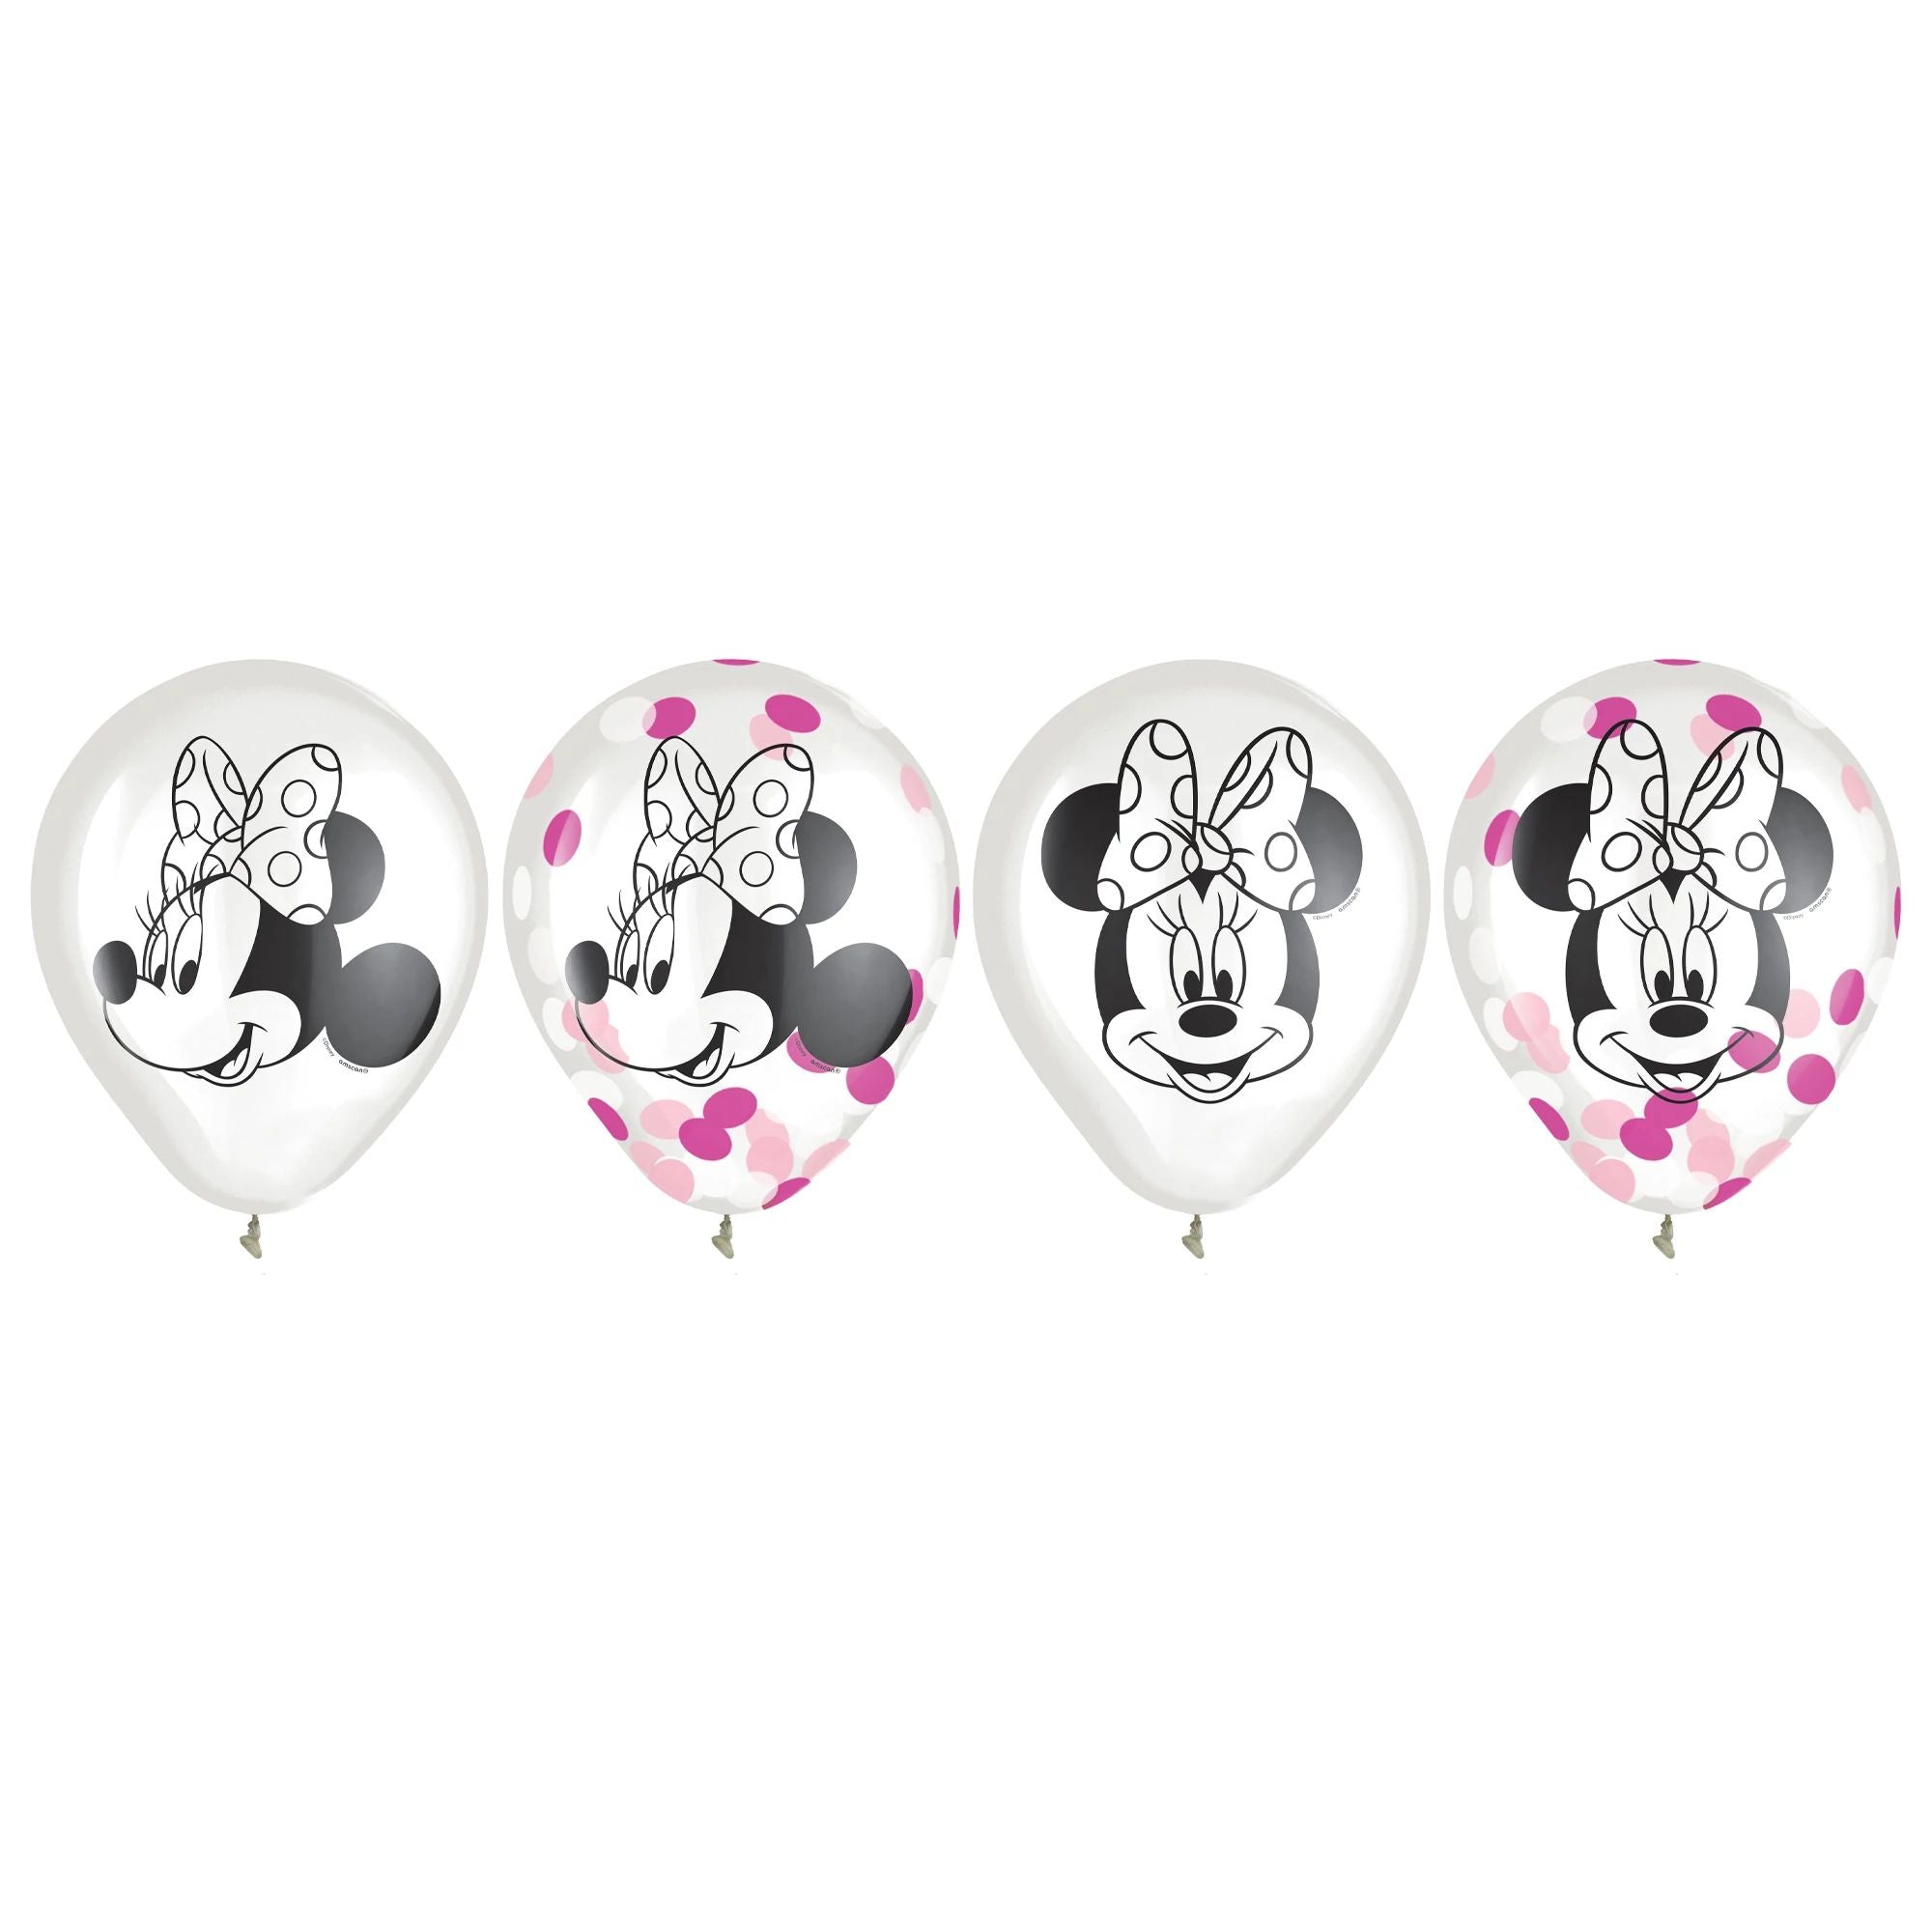 Minnie Mouse Forever Latex Confetti Balloon, 6ct